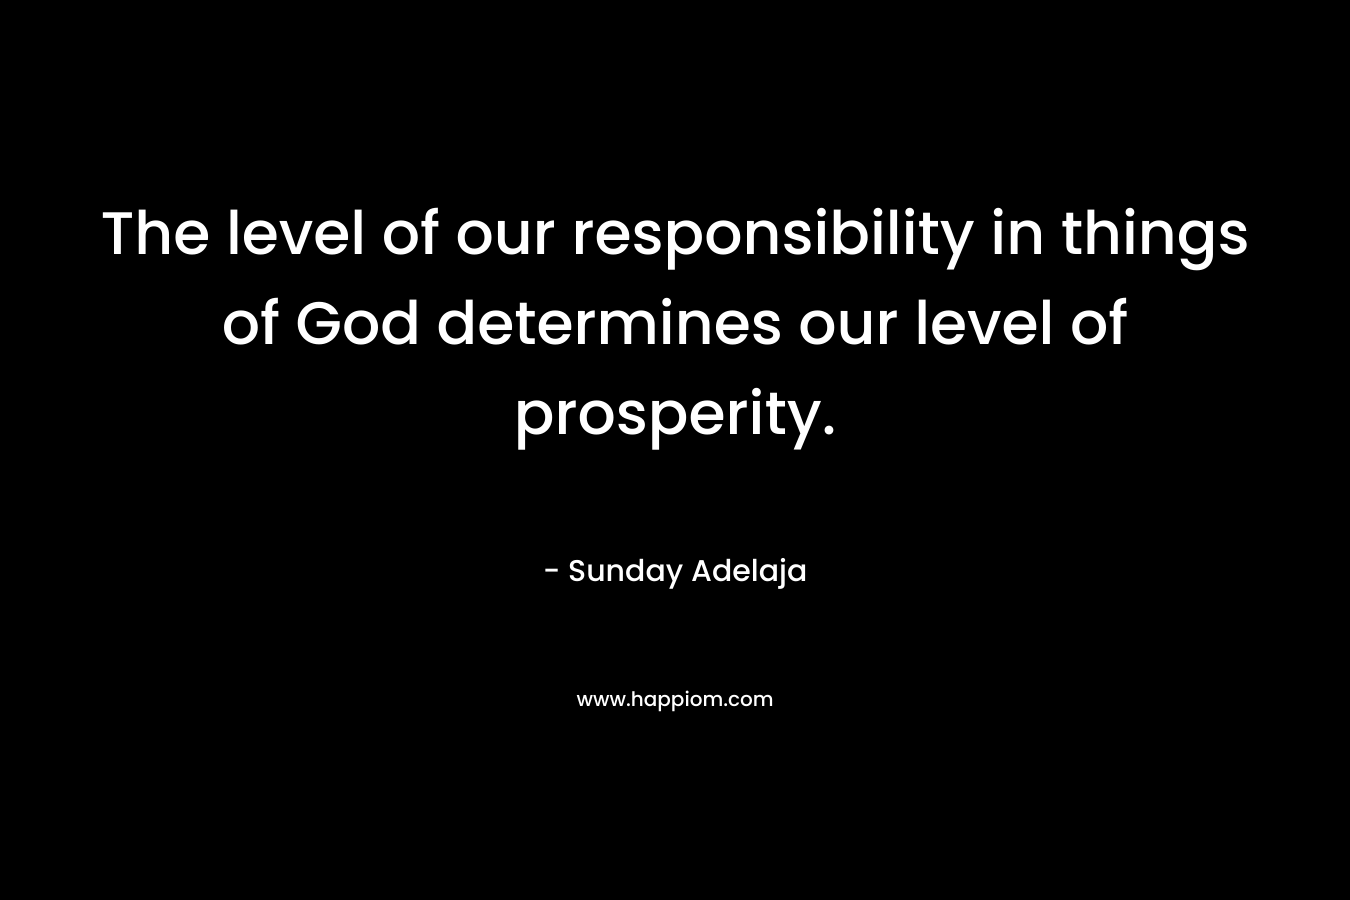 The level of our responsibility in things of God determines our level of prosperity. – Sunday Adelaja